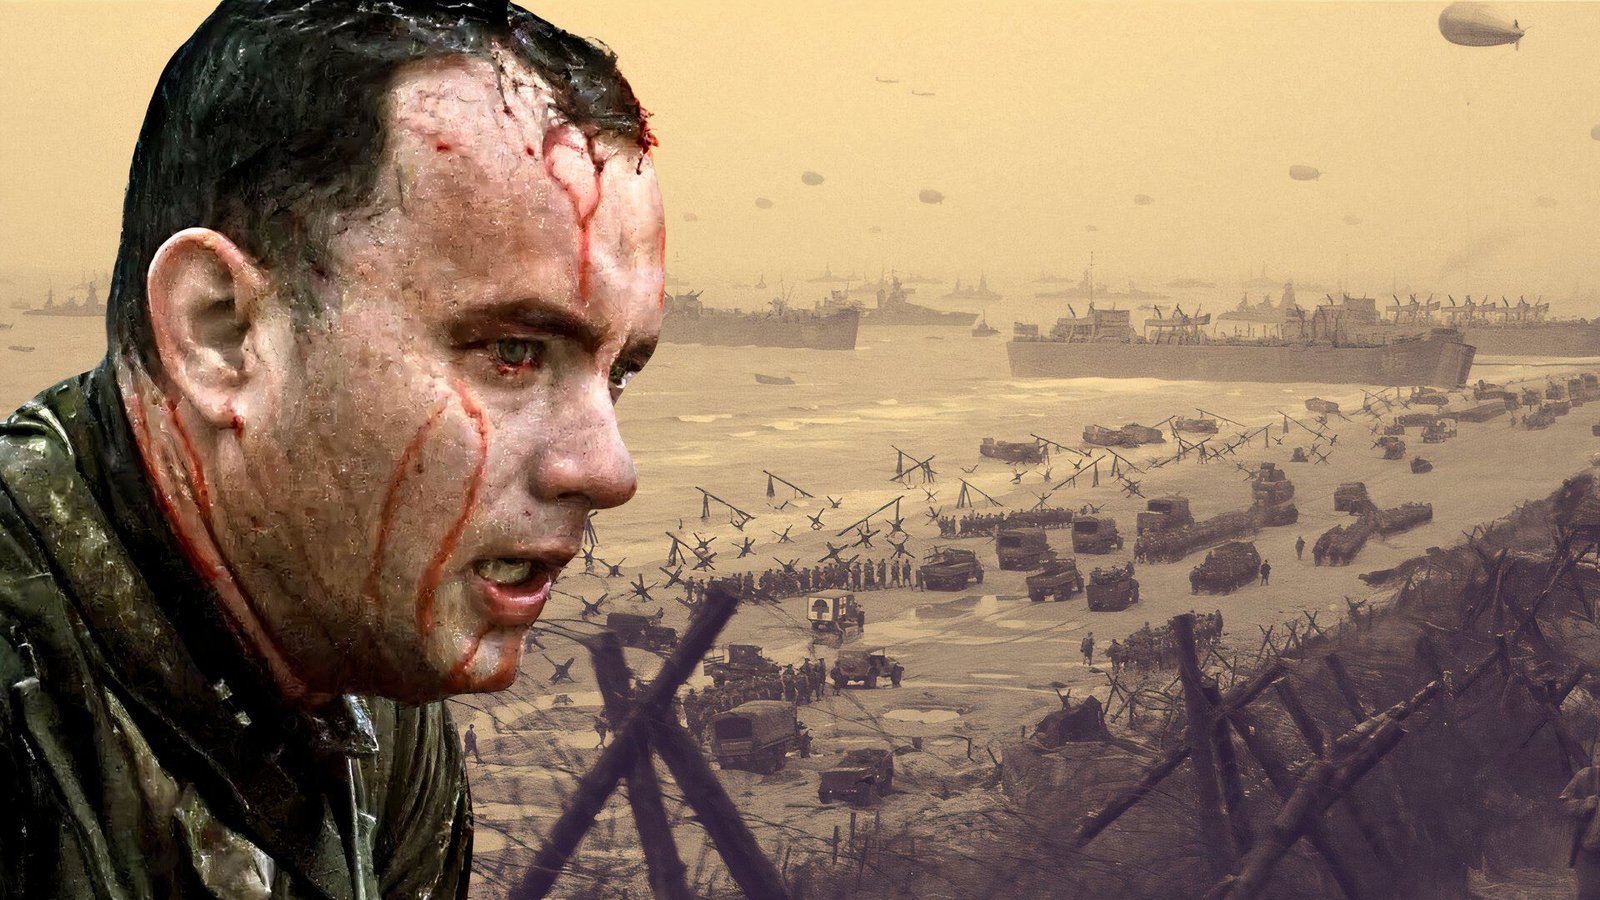 This Saving Private Ryan Shot Is the Most Overused Trope in Movies